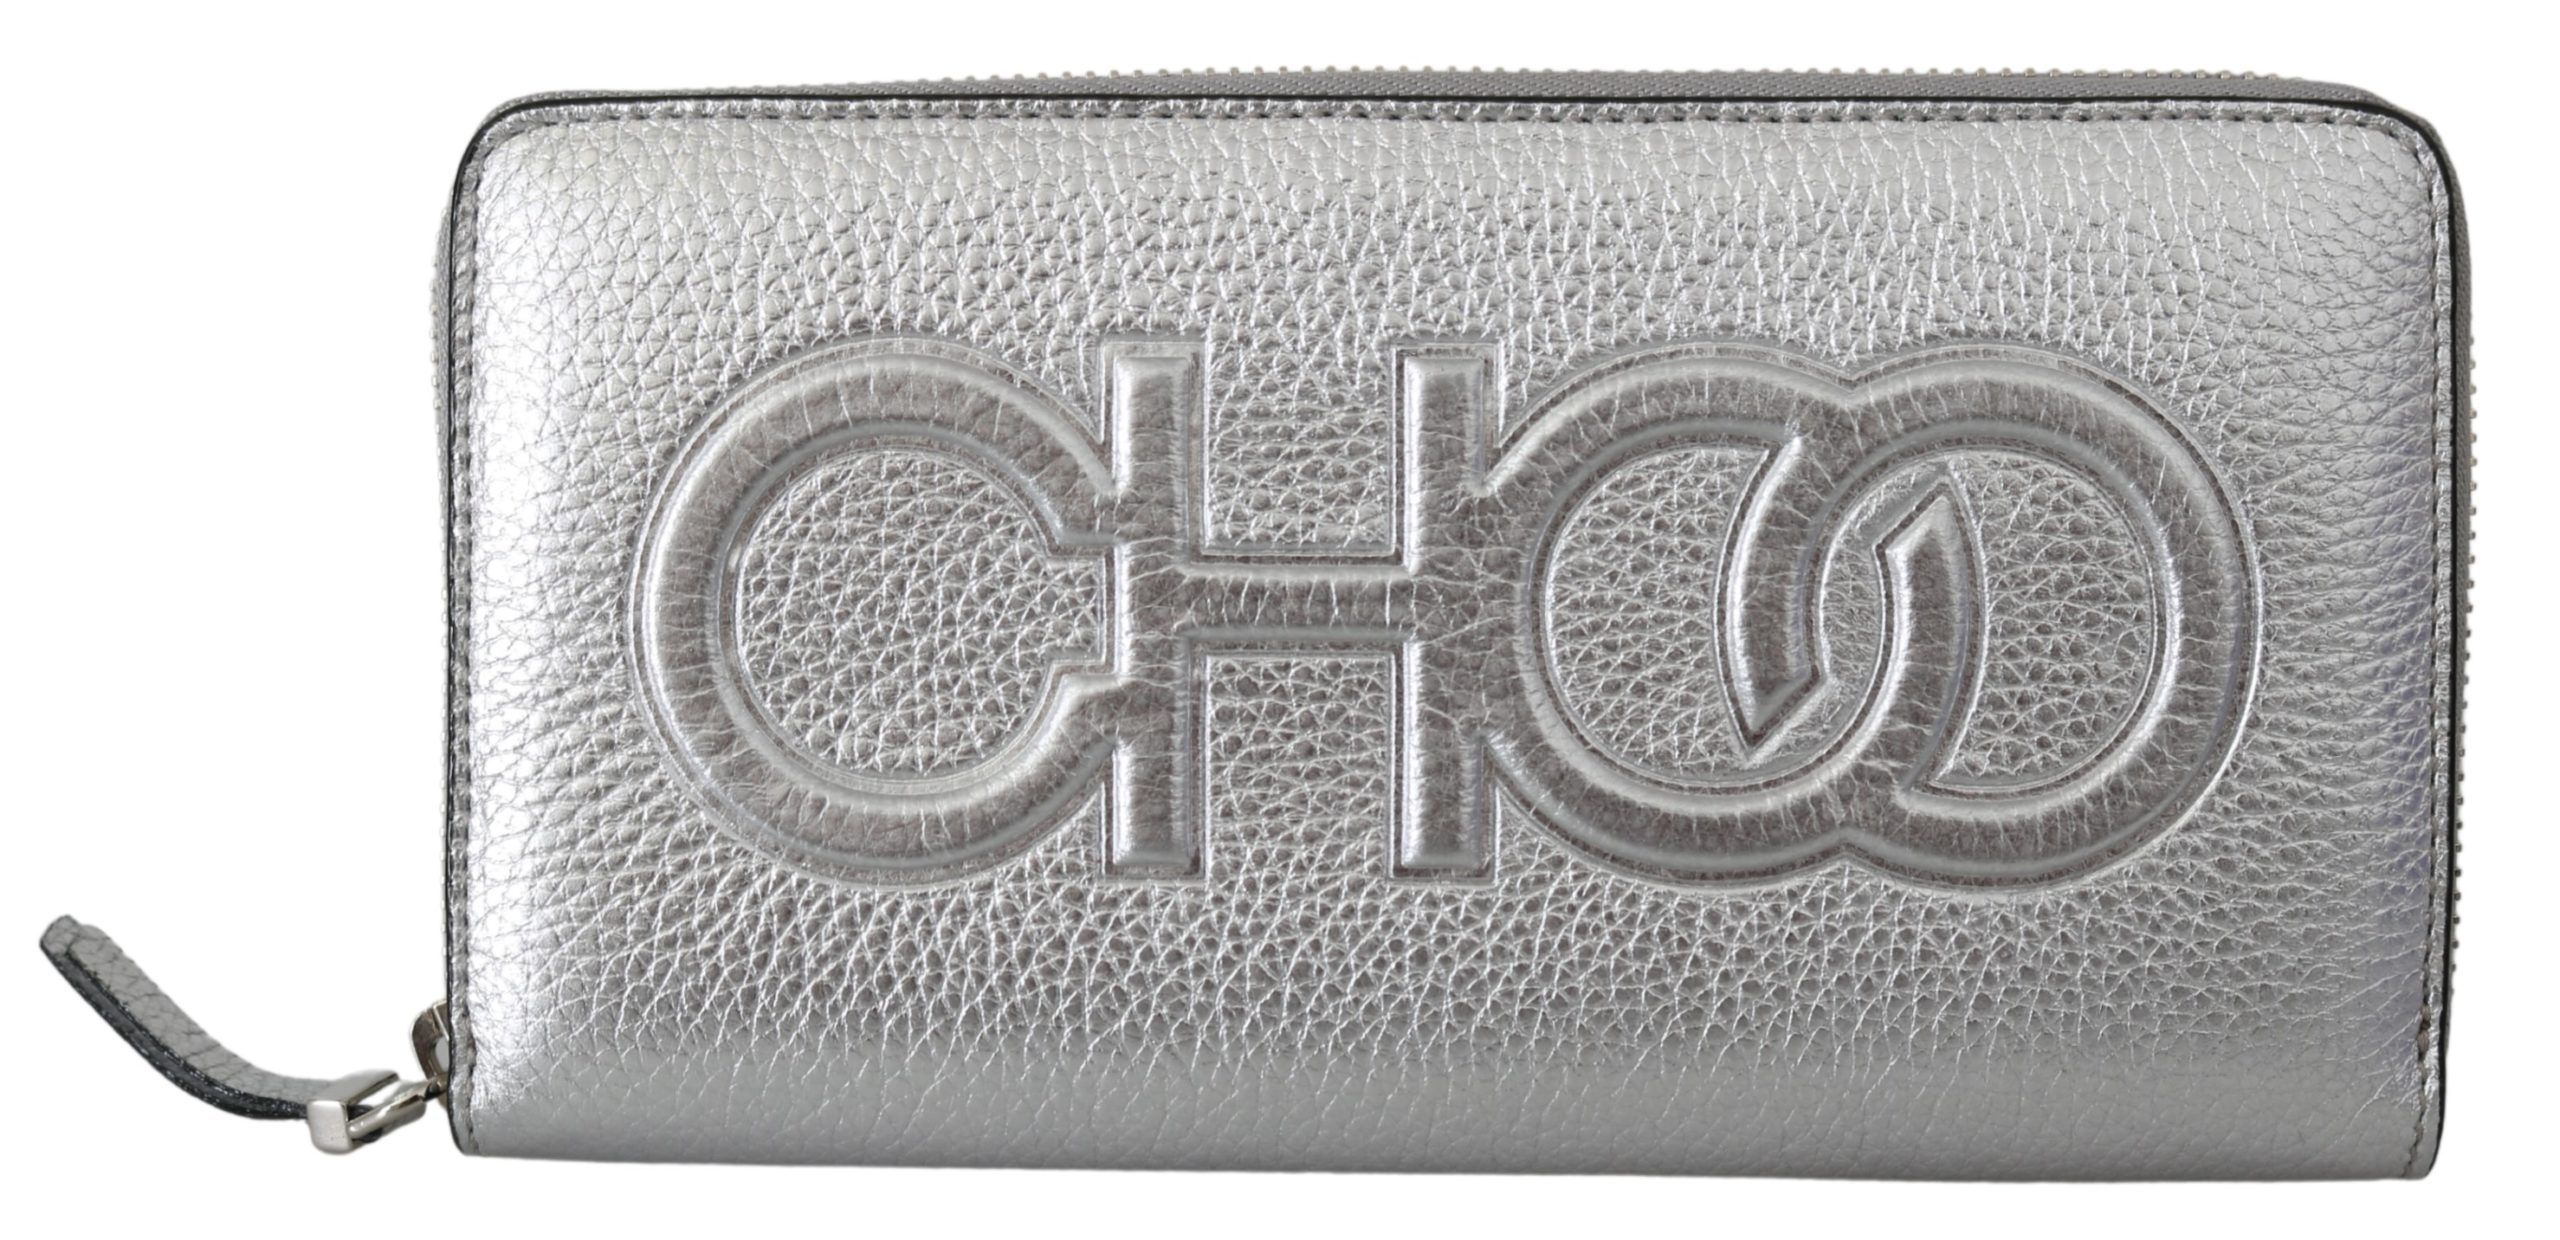 Gorgeous brand new with tags, a box and a dustbag. 
100% Authentic Jimmy Choo Wallet 
Model: Bettina Omgl 
Color: Silver 
Material: 100% Leather 
Details: Zip closer, Interior pocket, logo details 
Measurement L*H*W: 19cm*10cm*2,5cm 
Collection Season. 2021 A/W